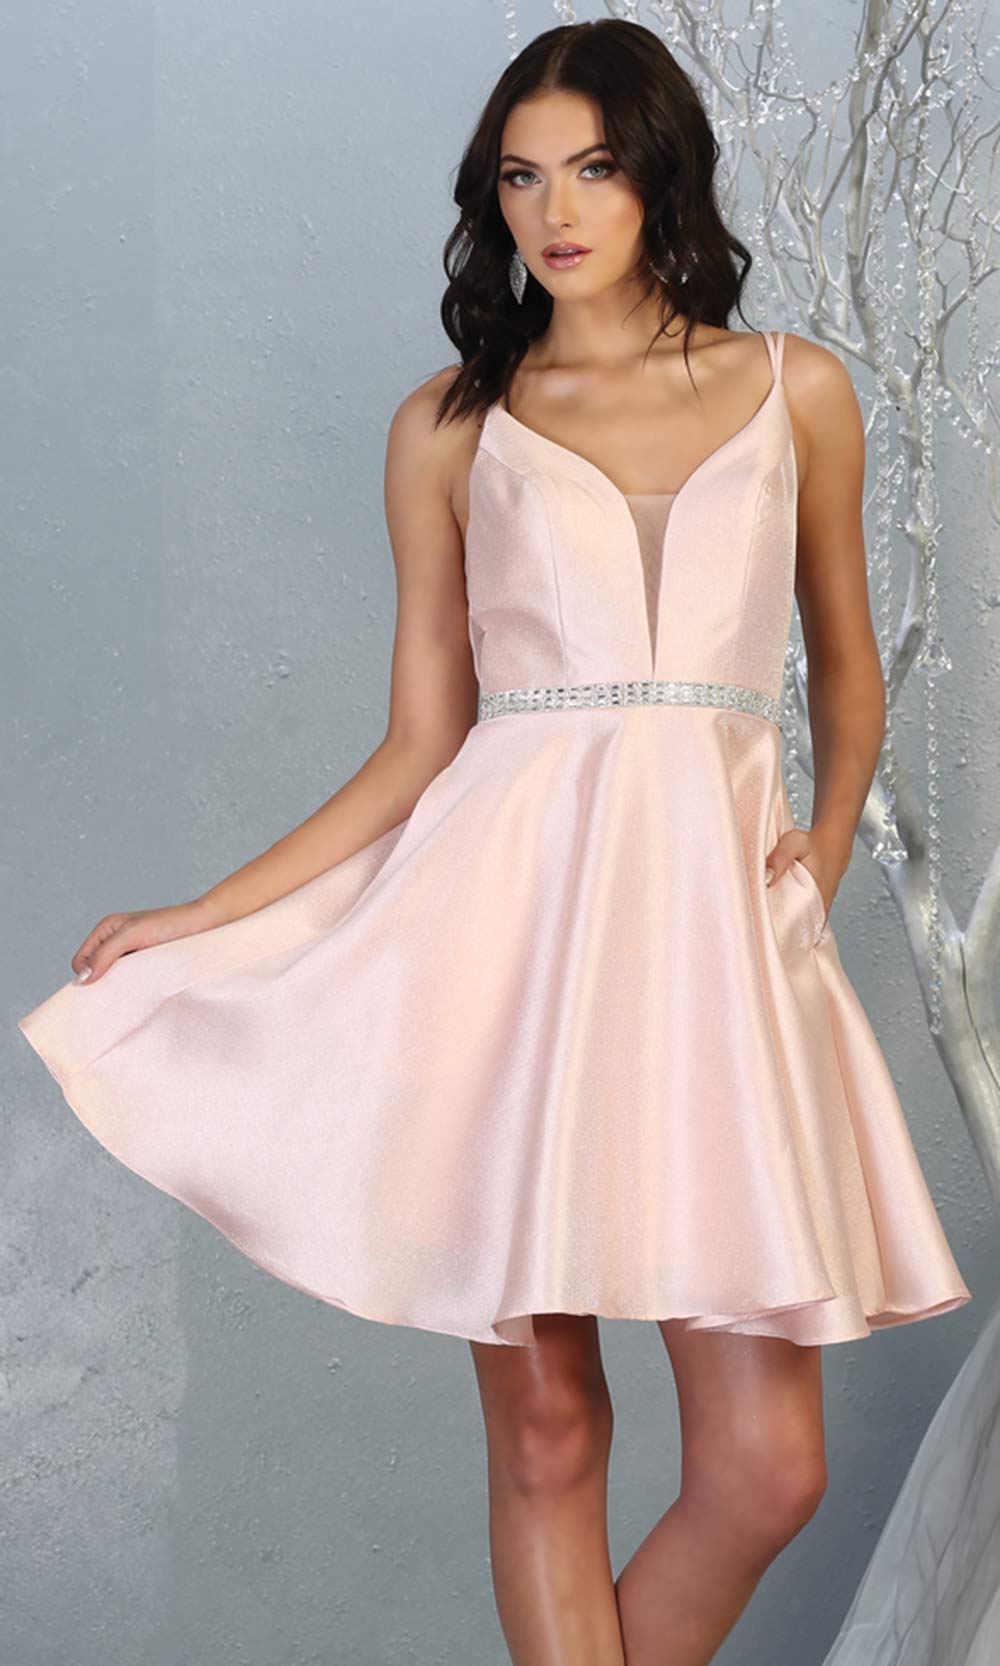 Mayqueen MQ1775 short blush pink satin flowy vneck simple grade 8 graduation dress w/ straps & low back. Light pink party dress is perfect for prom,graduation, grade 8 grad, confirmation dress, bat mitzvah dress, damas. Plus sizes avail for grad dress.jpggrade 8 grad dresses, graduation dresses